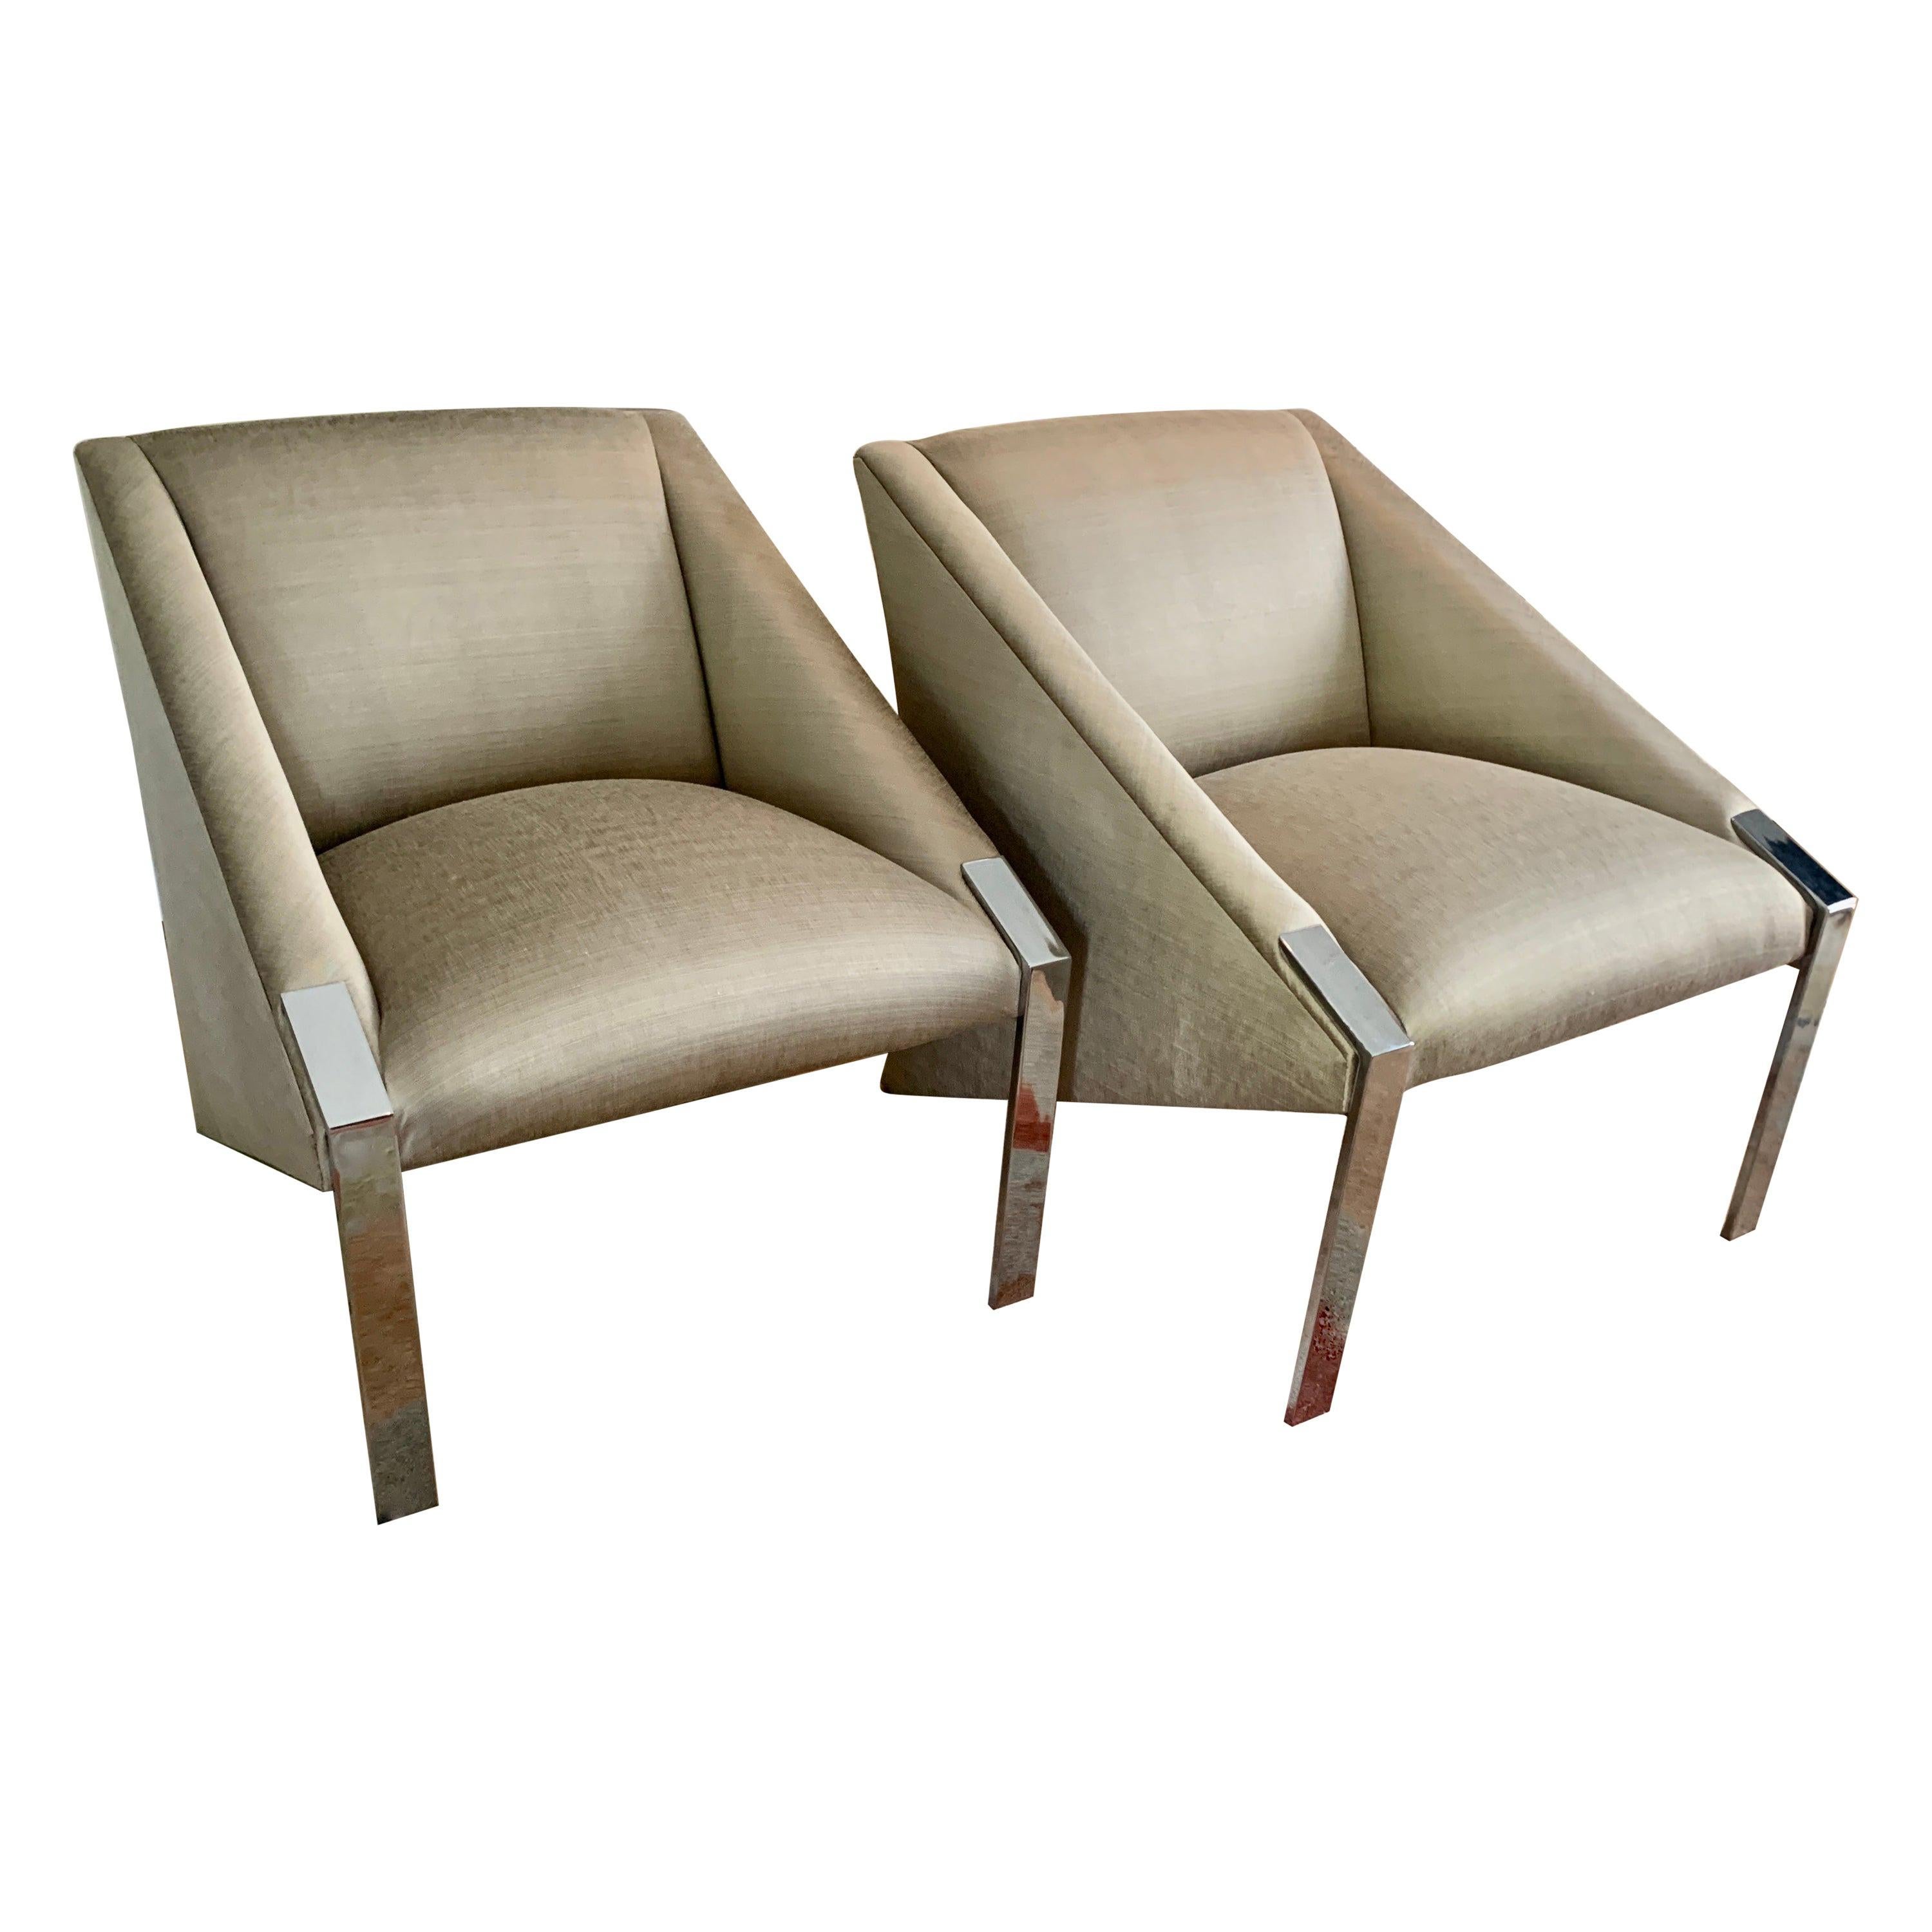 Pair Andree Putman Chrome Modern Lounge Side Chairs in Silk Upholstery